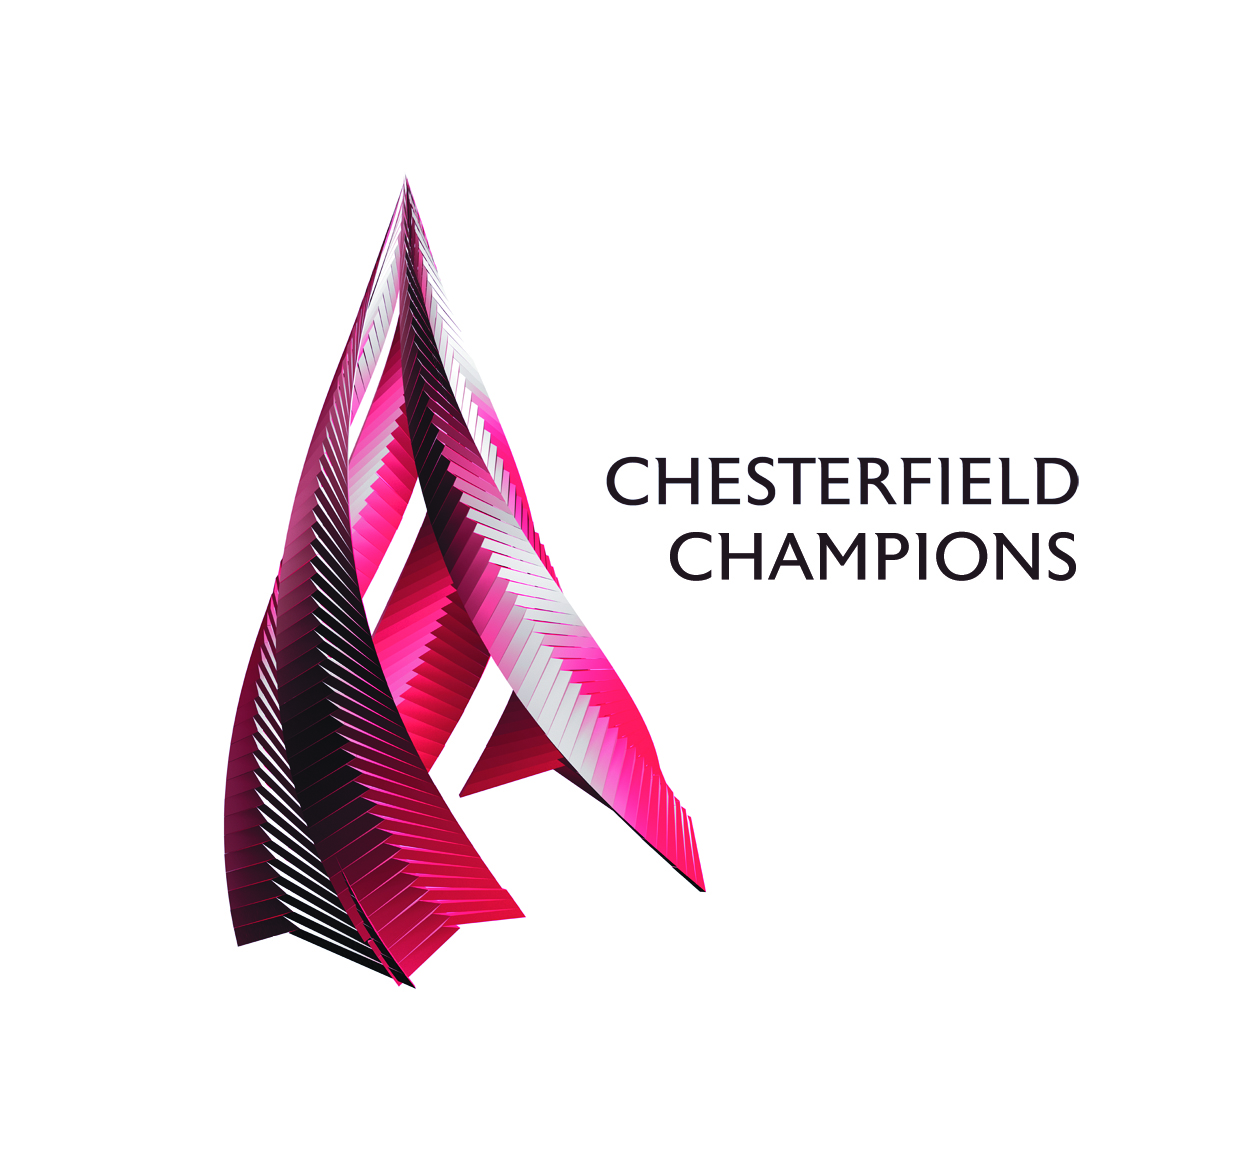 Chesterfield Champions logo to demonstrate our membership